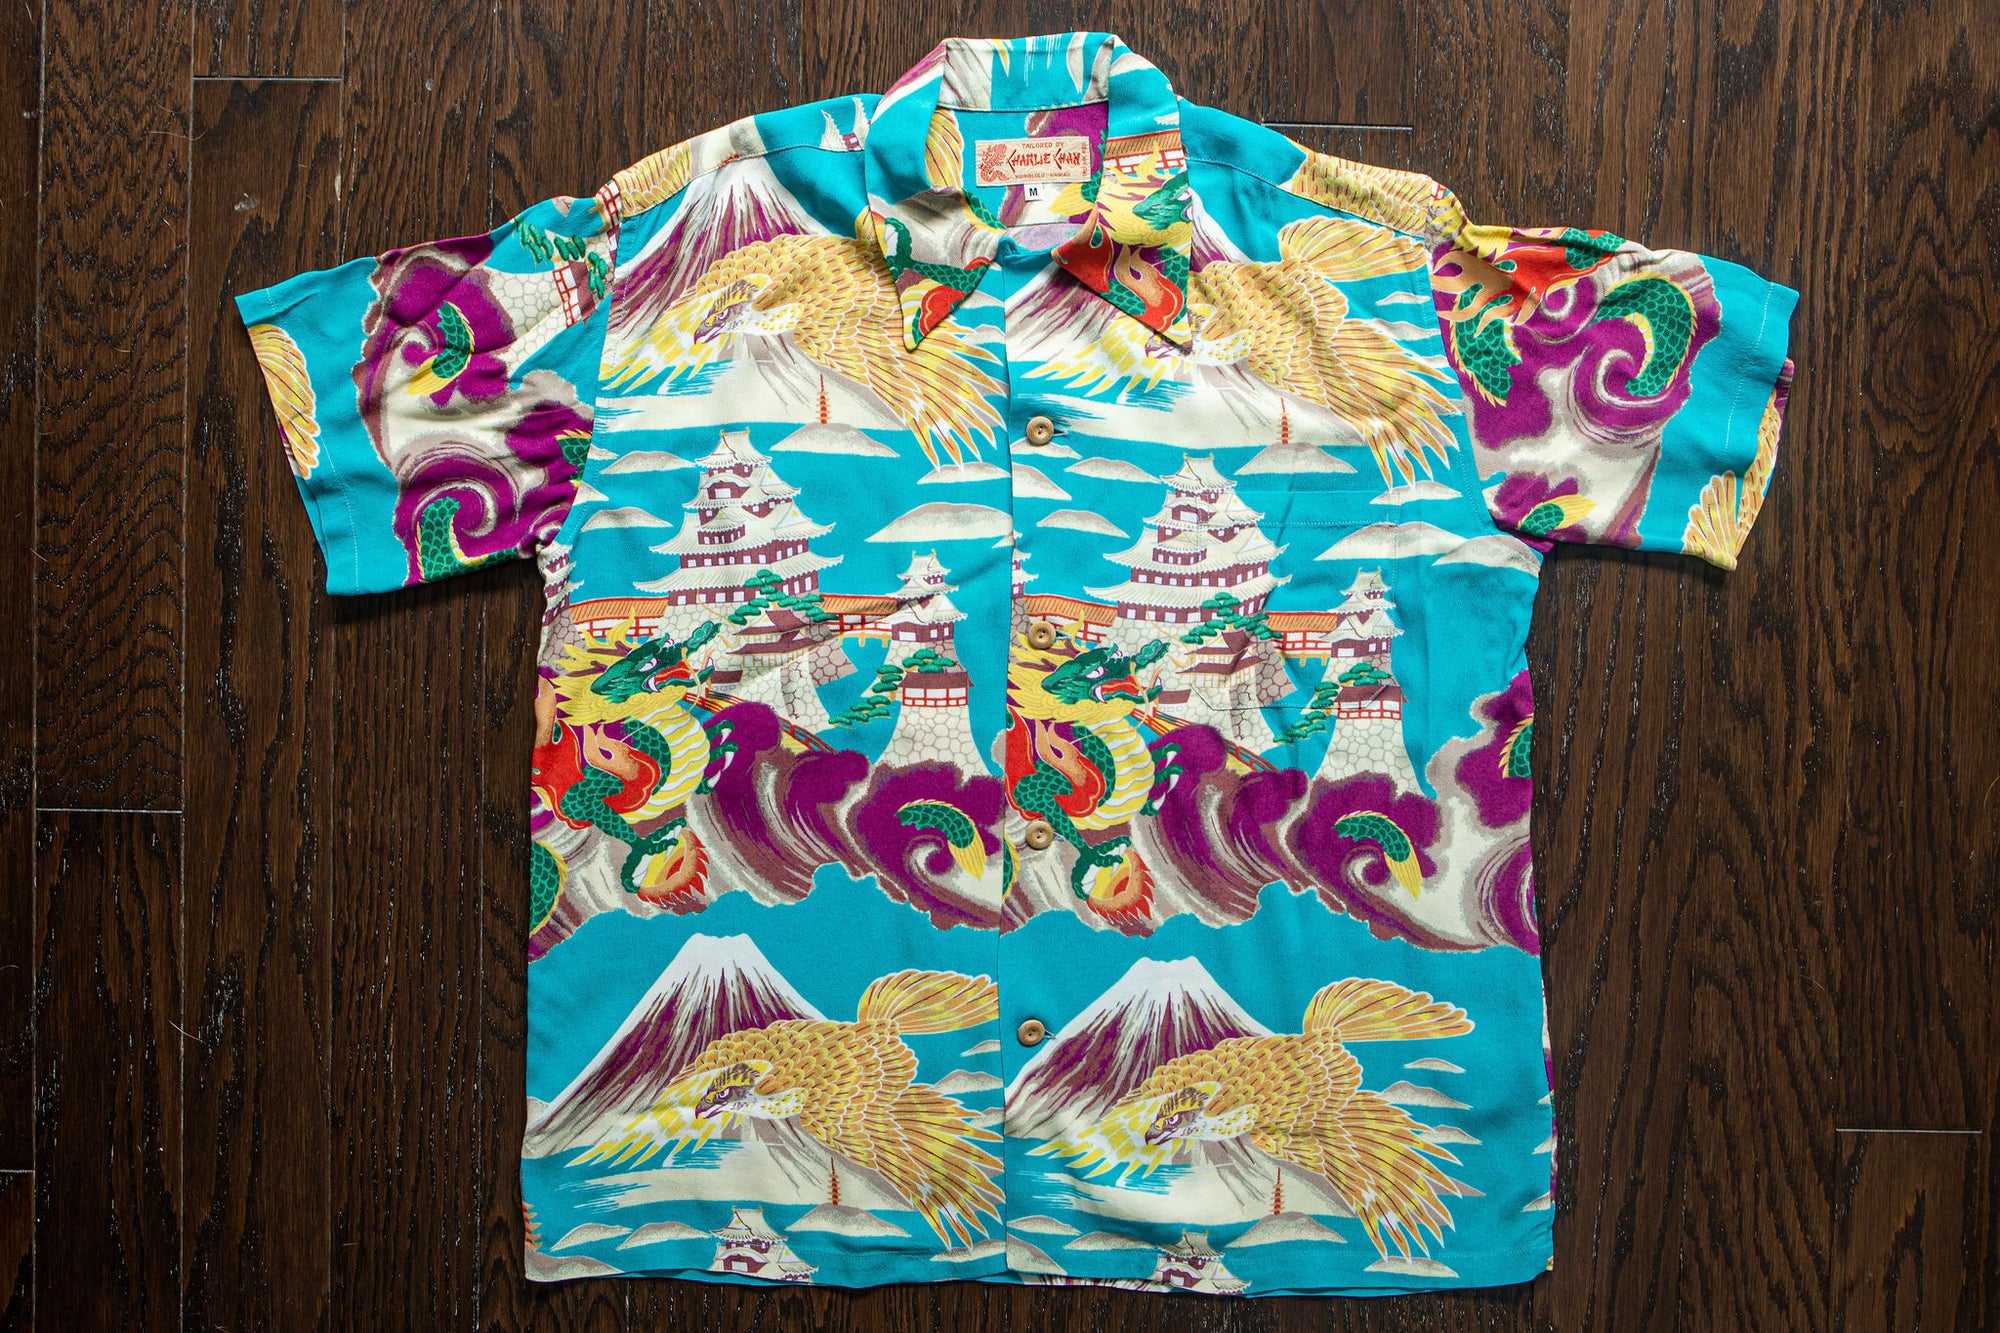 Sun Surf Special Edition "Legendary Hawaii" - Turquoise